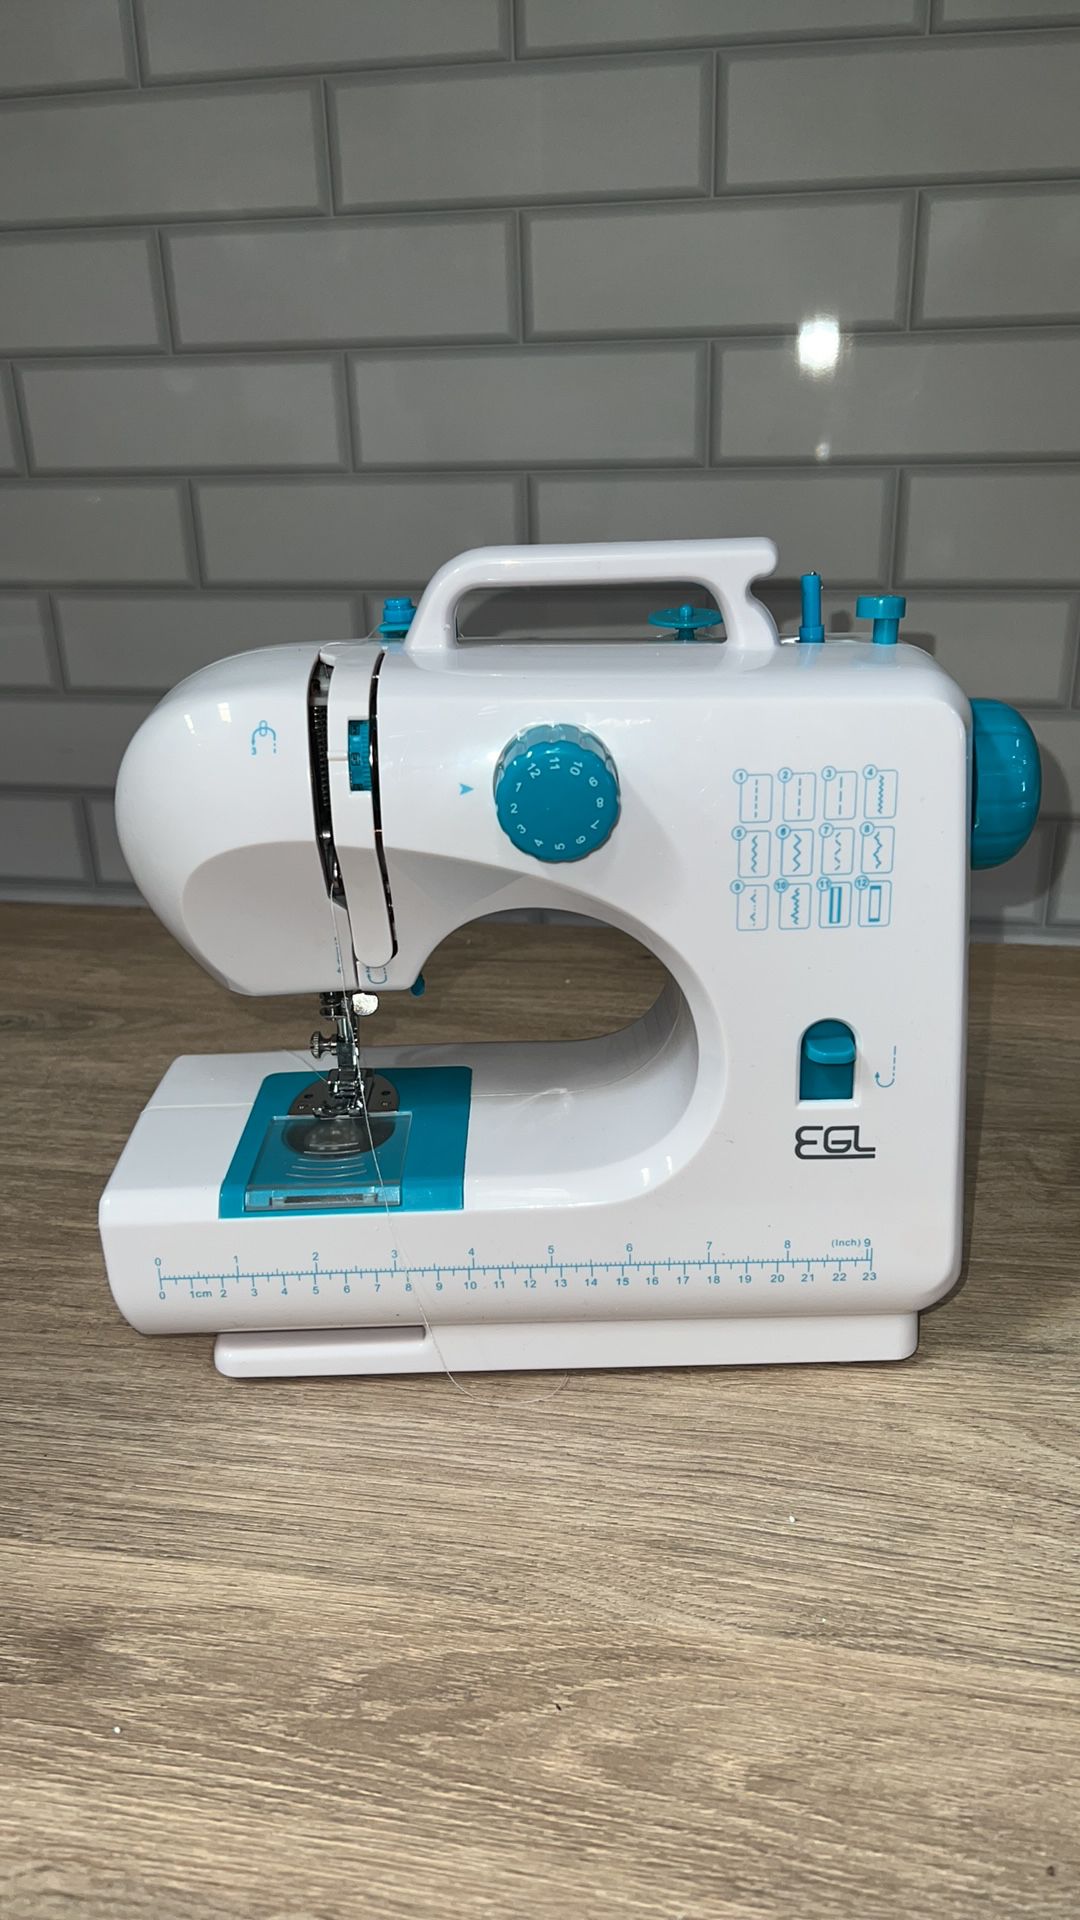 EGL 506 COMPACT SEWING MACHINE - Image 2 of 3